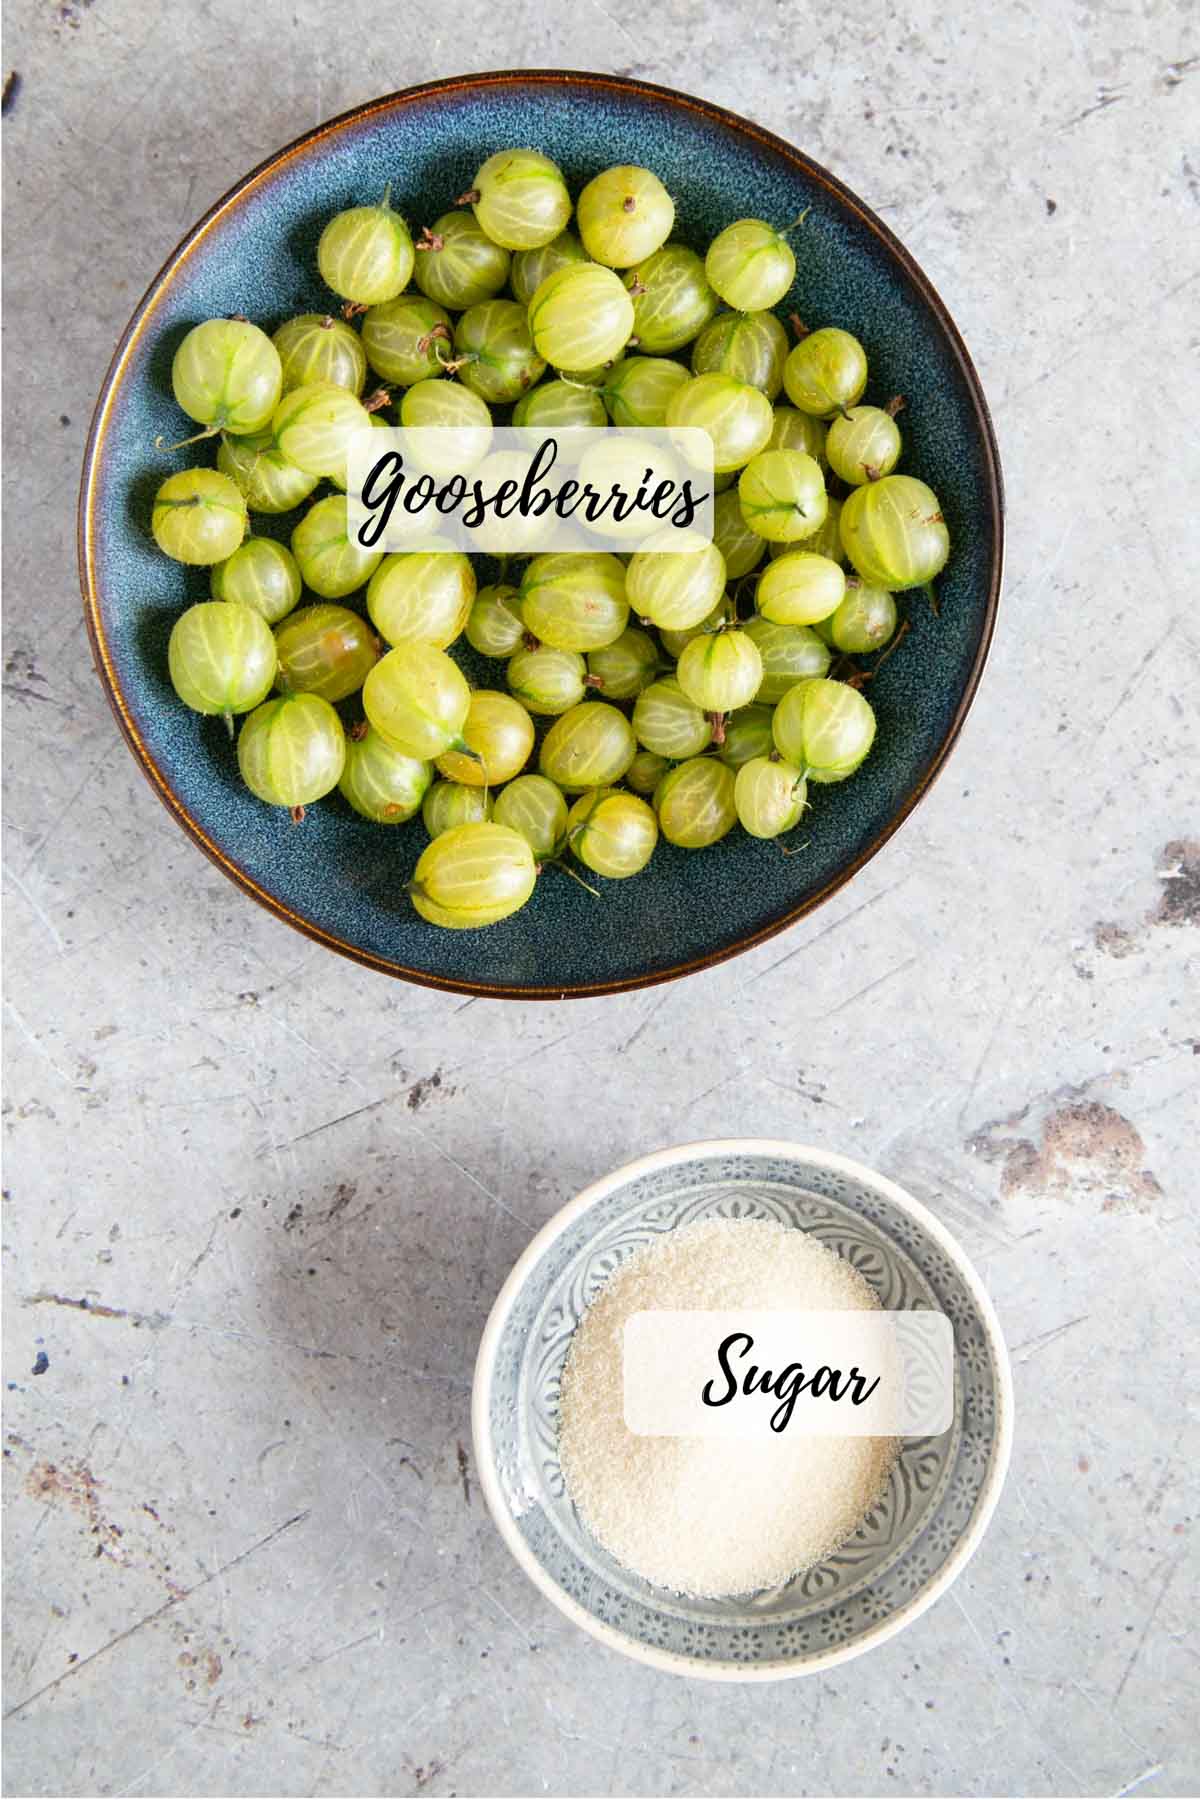 The two ingredients for gooseberry compote - fruit and sugar. Just add a small splash of water.